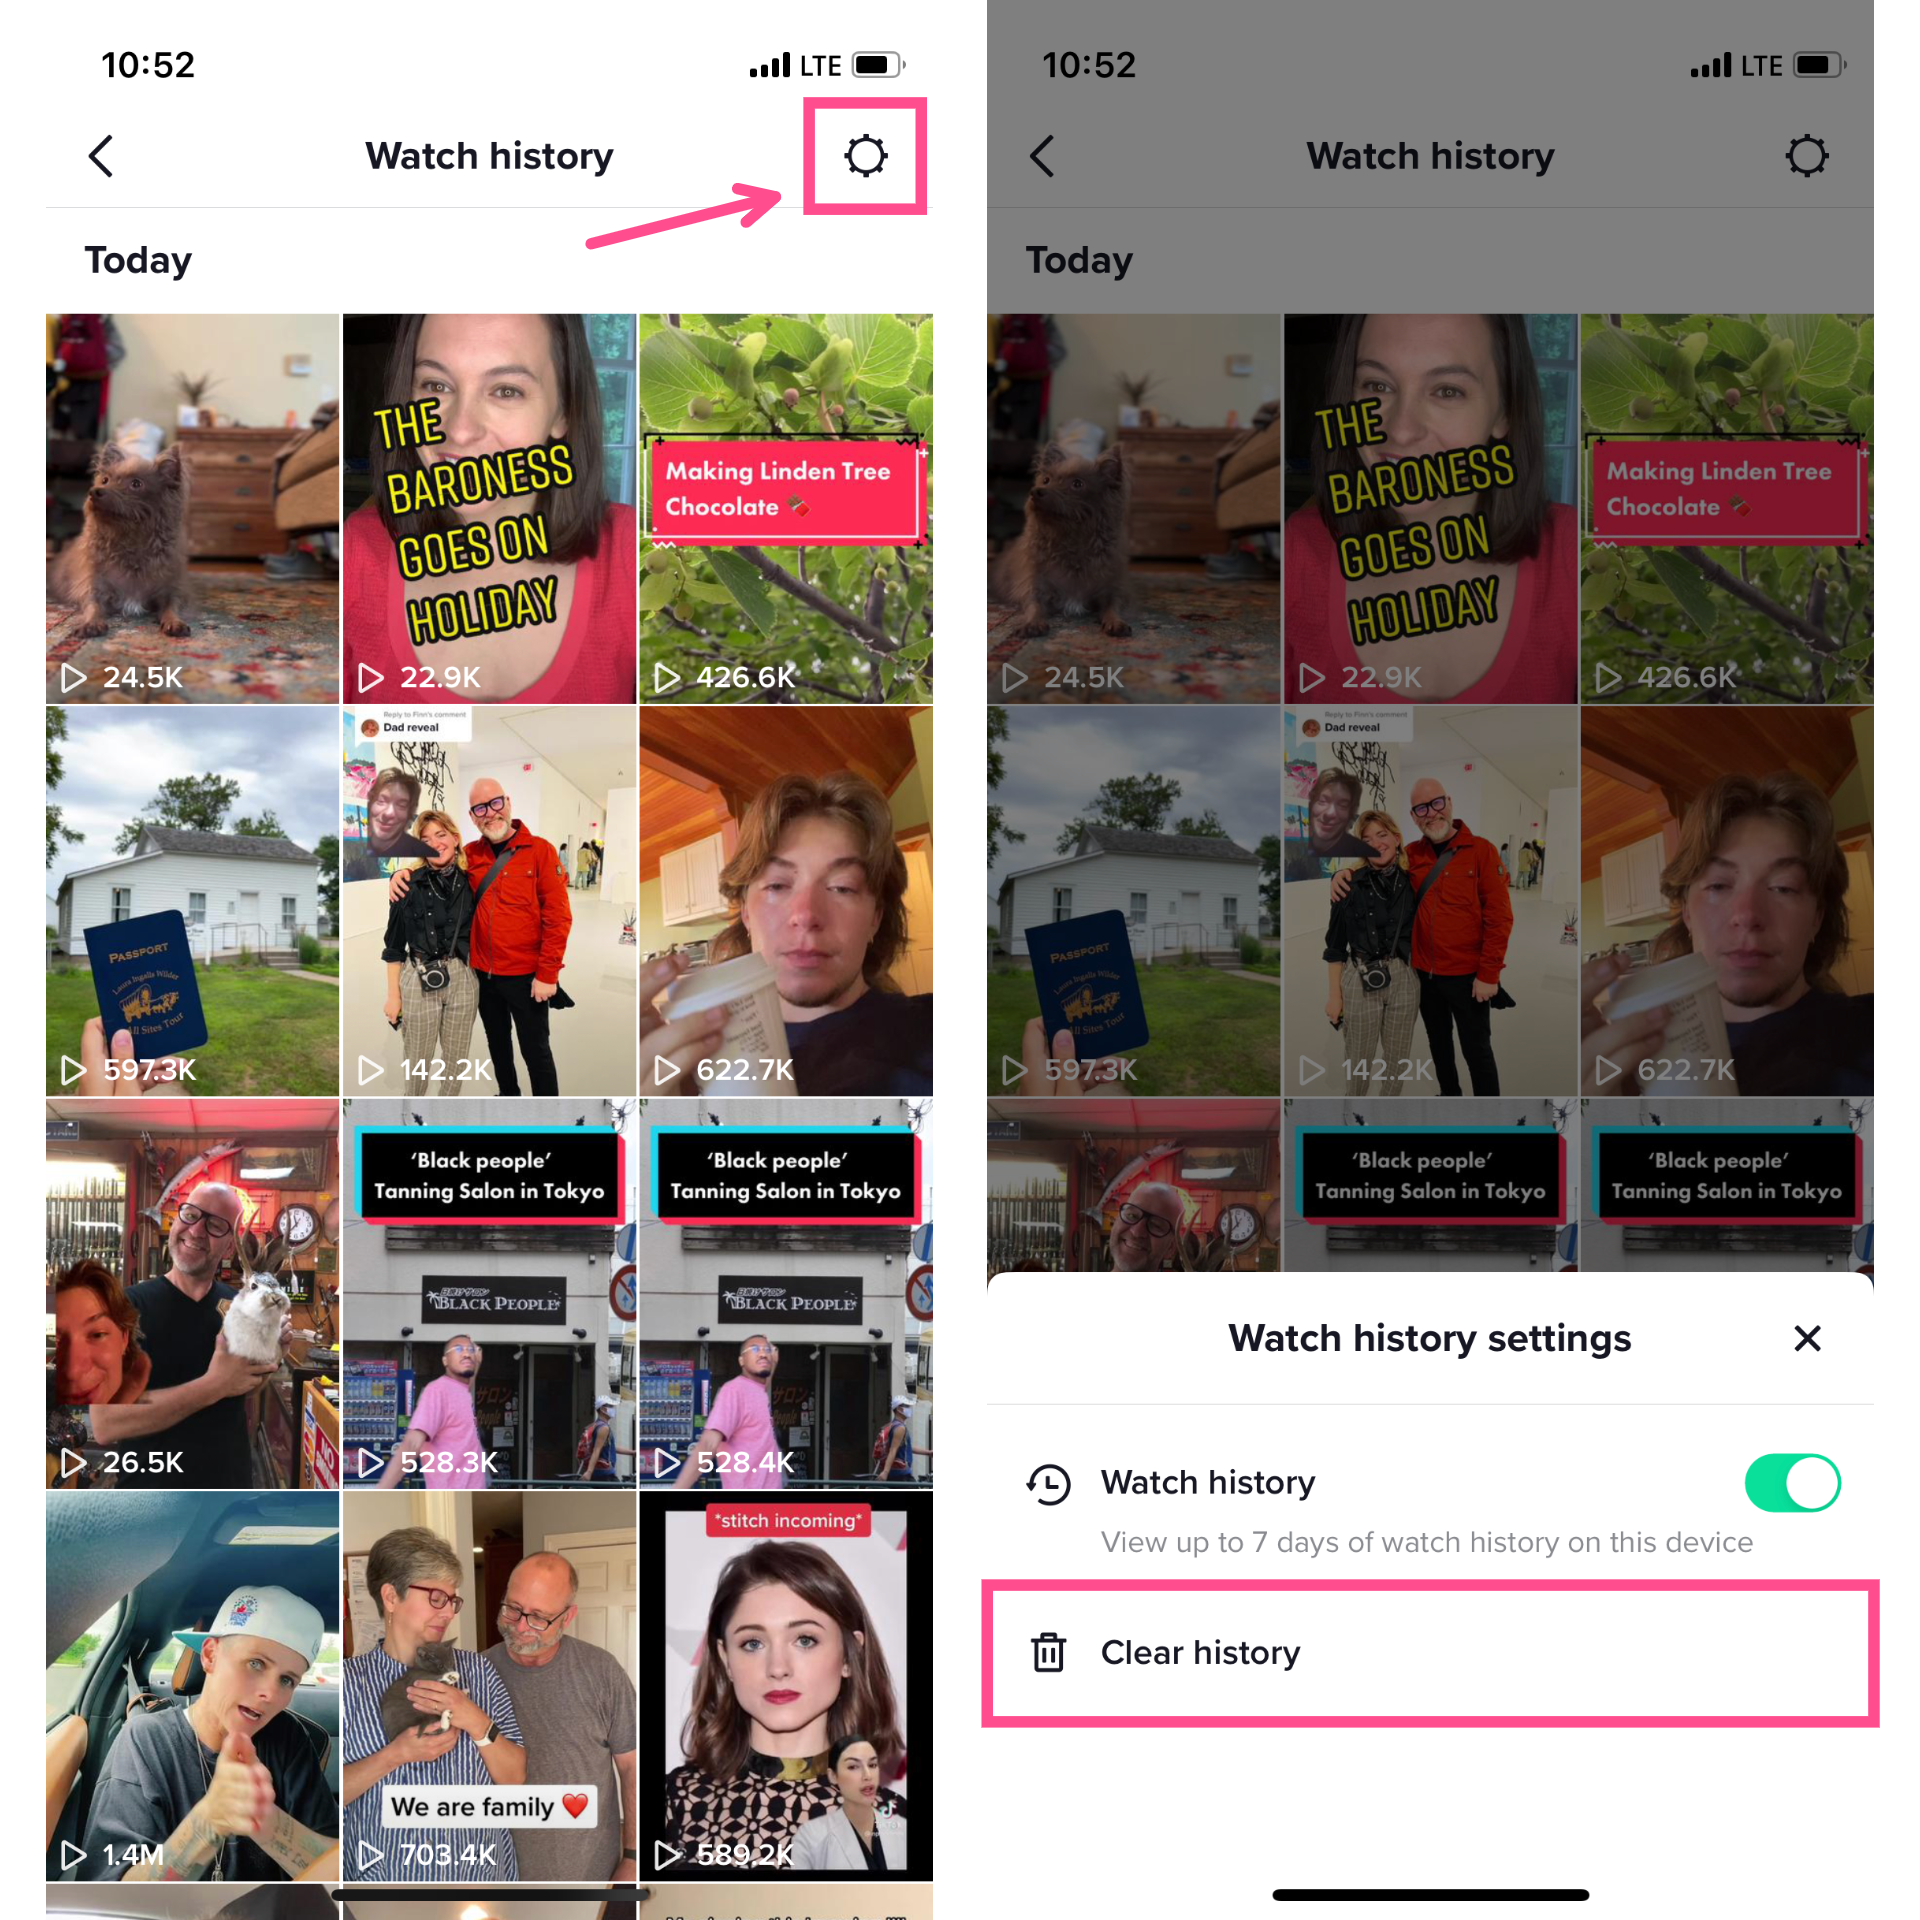 How to View Your Watch History in TikTok